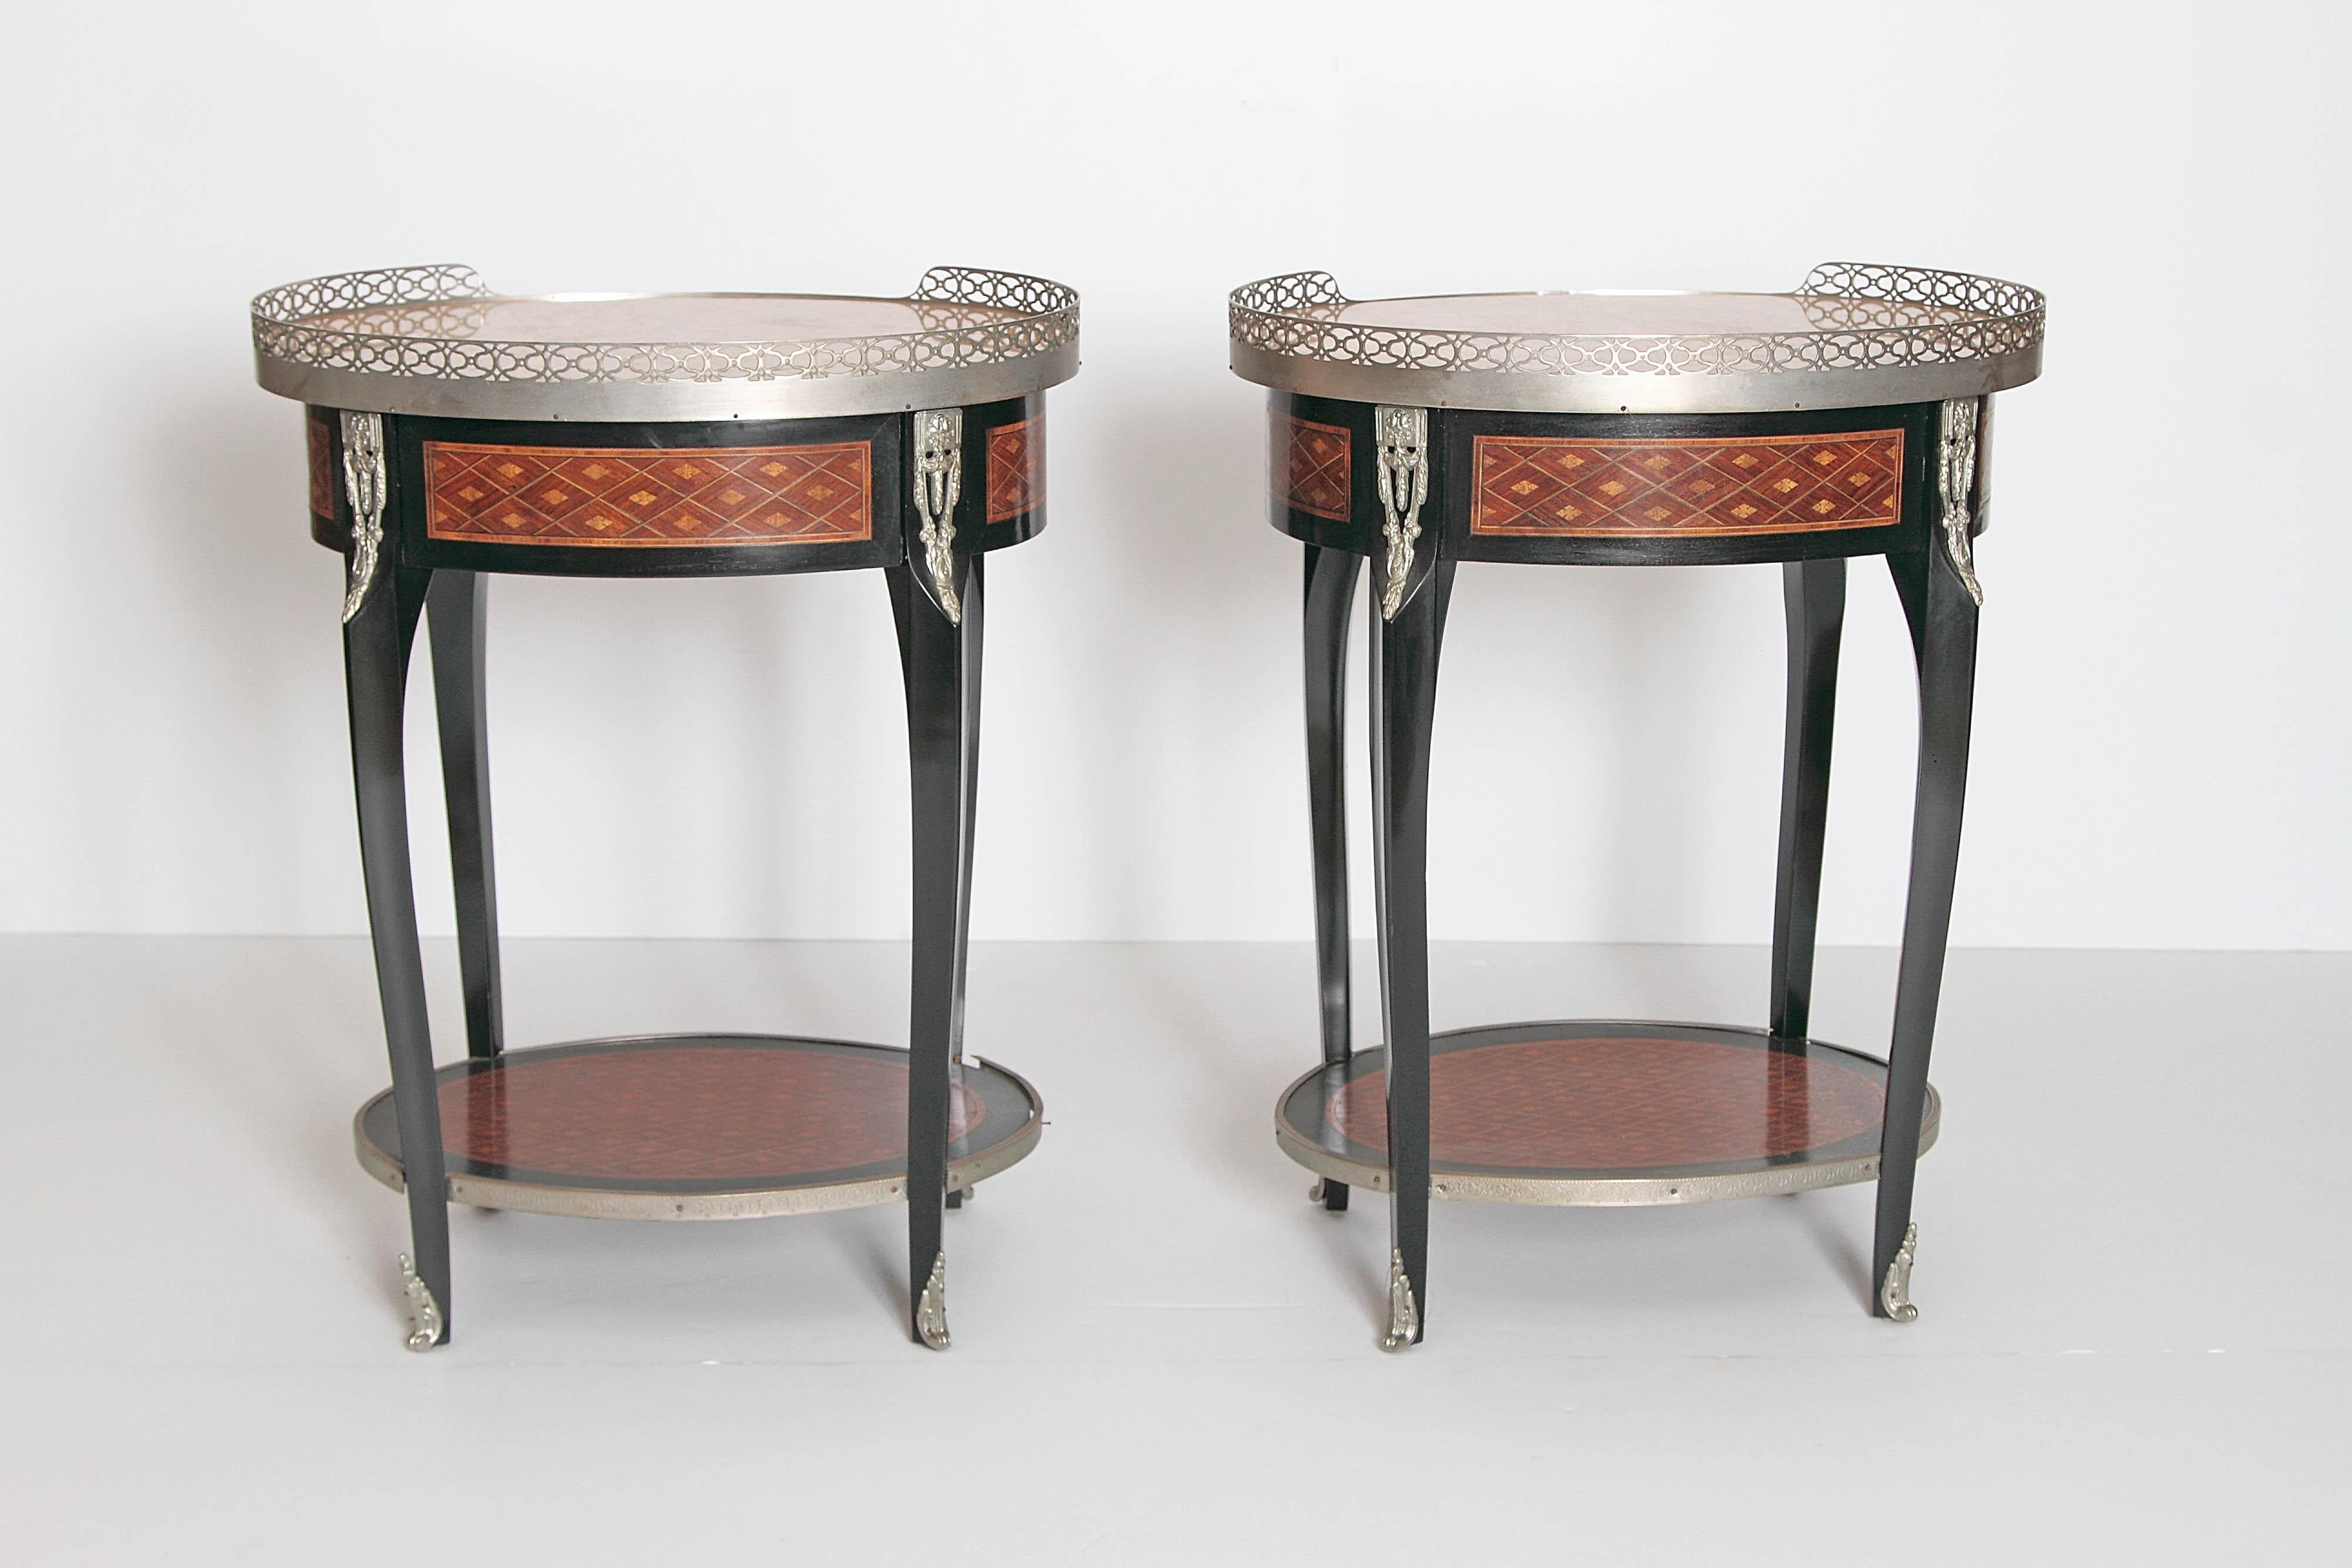 19th Century Pair of Louis XVI-Style Guéridons with Silver Gilt Bronze Mounts